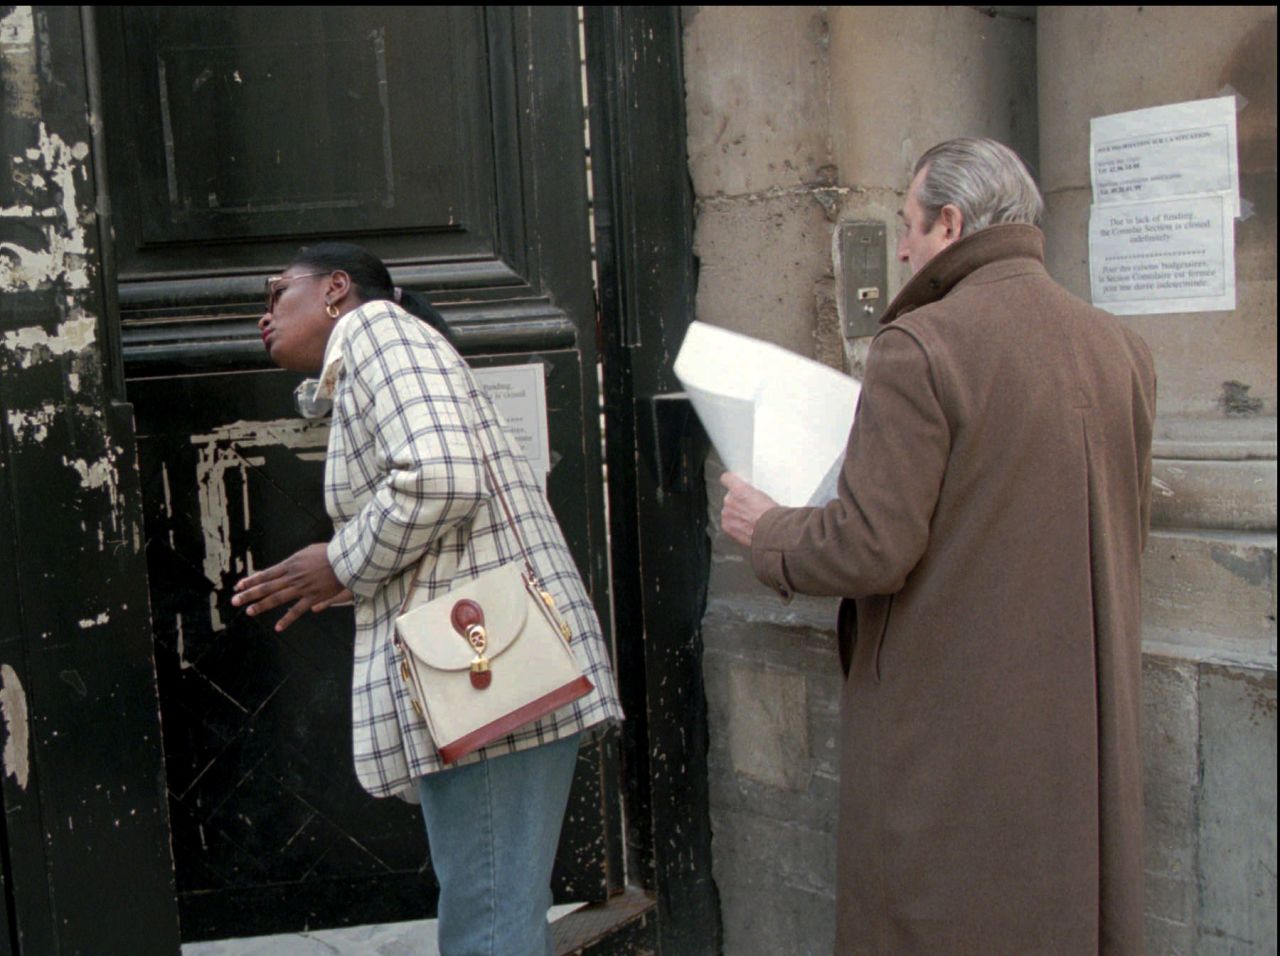 People trying to apply for visas at the U.S. consulate in Paris on January 5, 1996, are told that the building is closed because of the U.S. budget crisis.